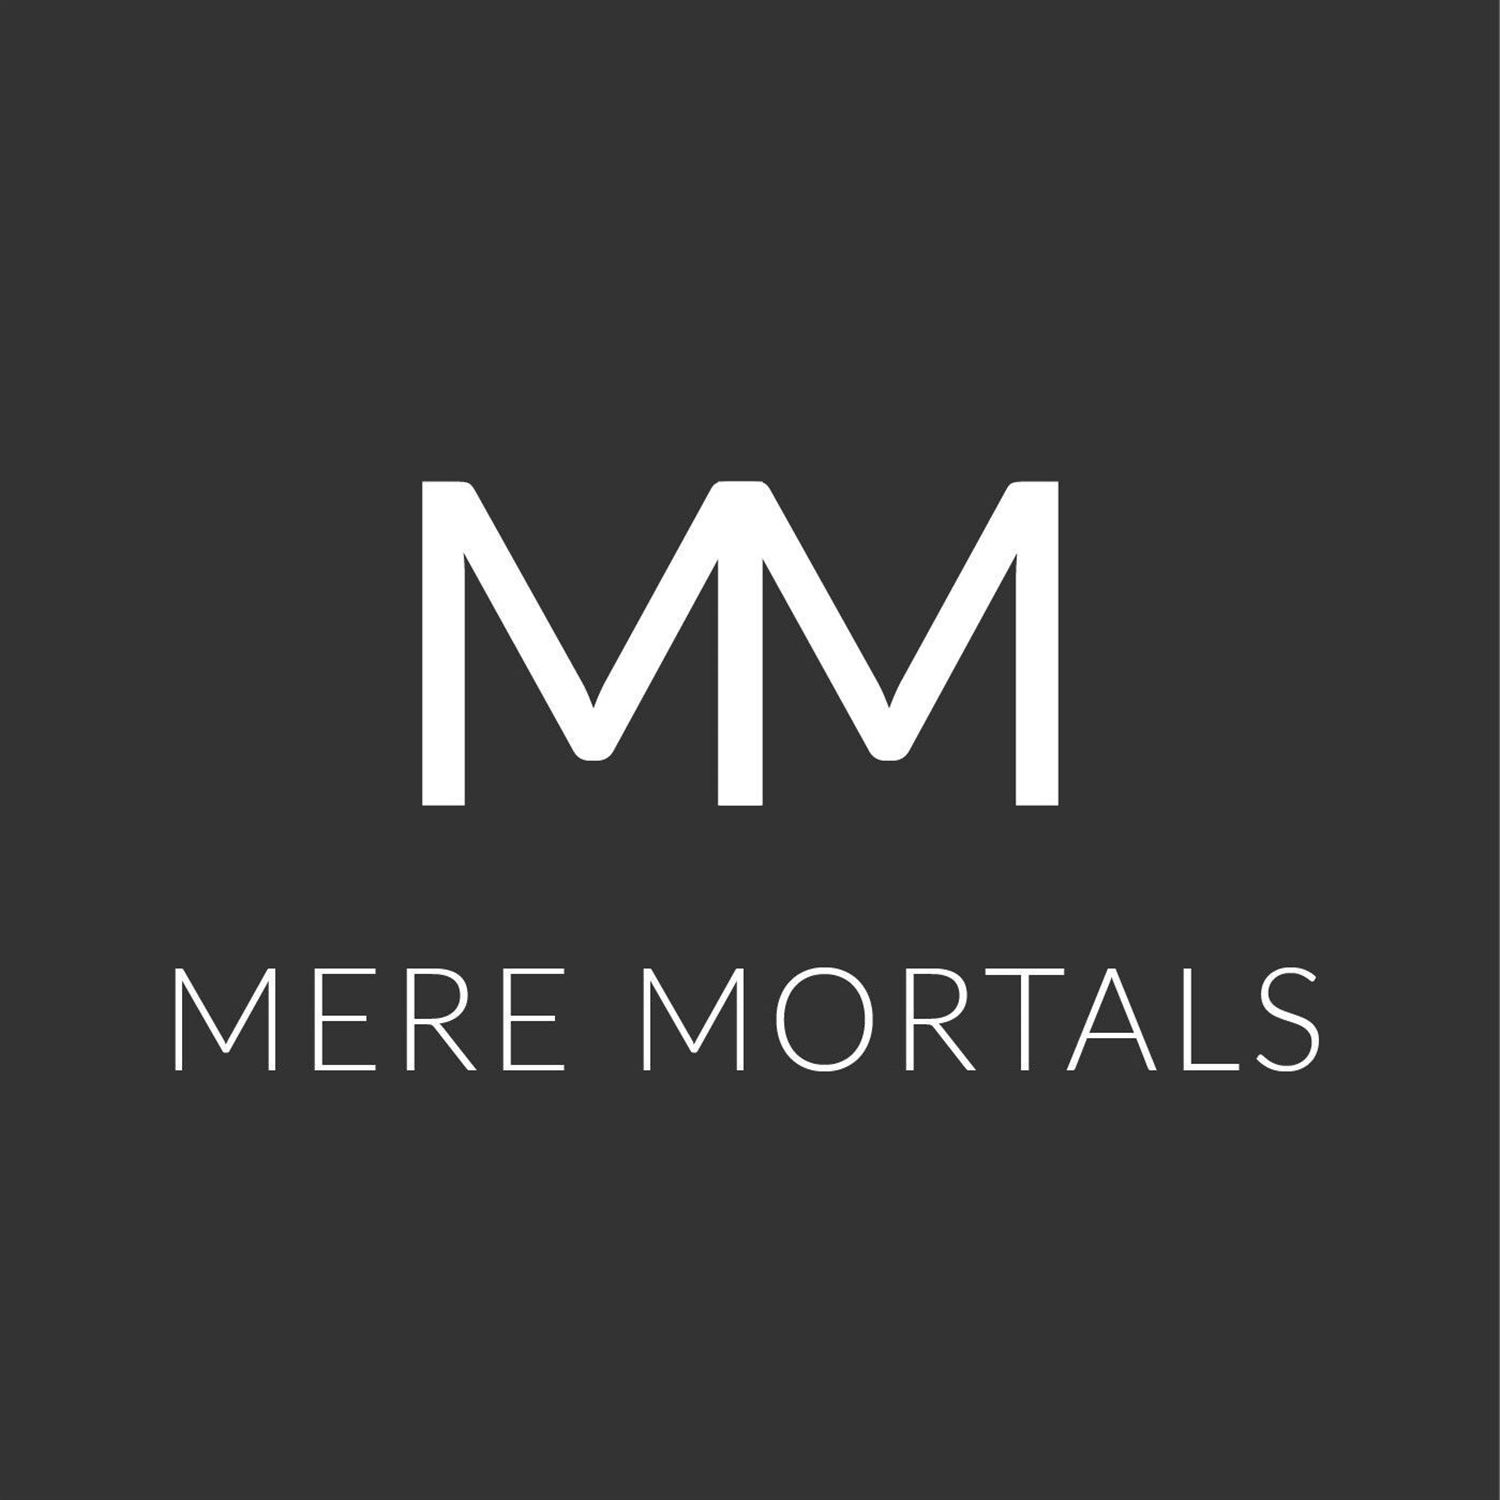 How Long To Achieve The Splits? (Mere Mortals Episode #49 - Stretching & Flexibility)